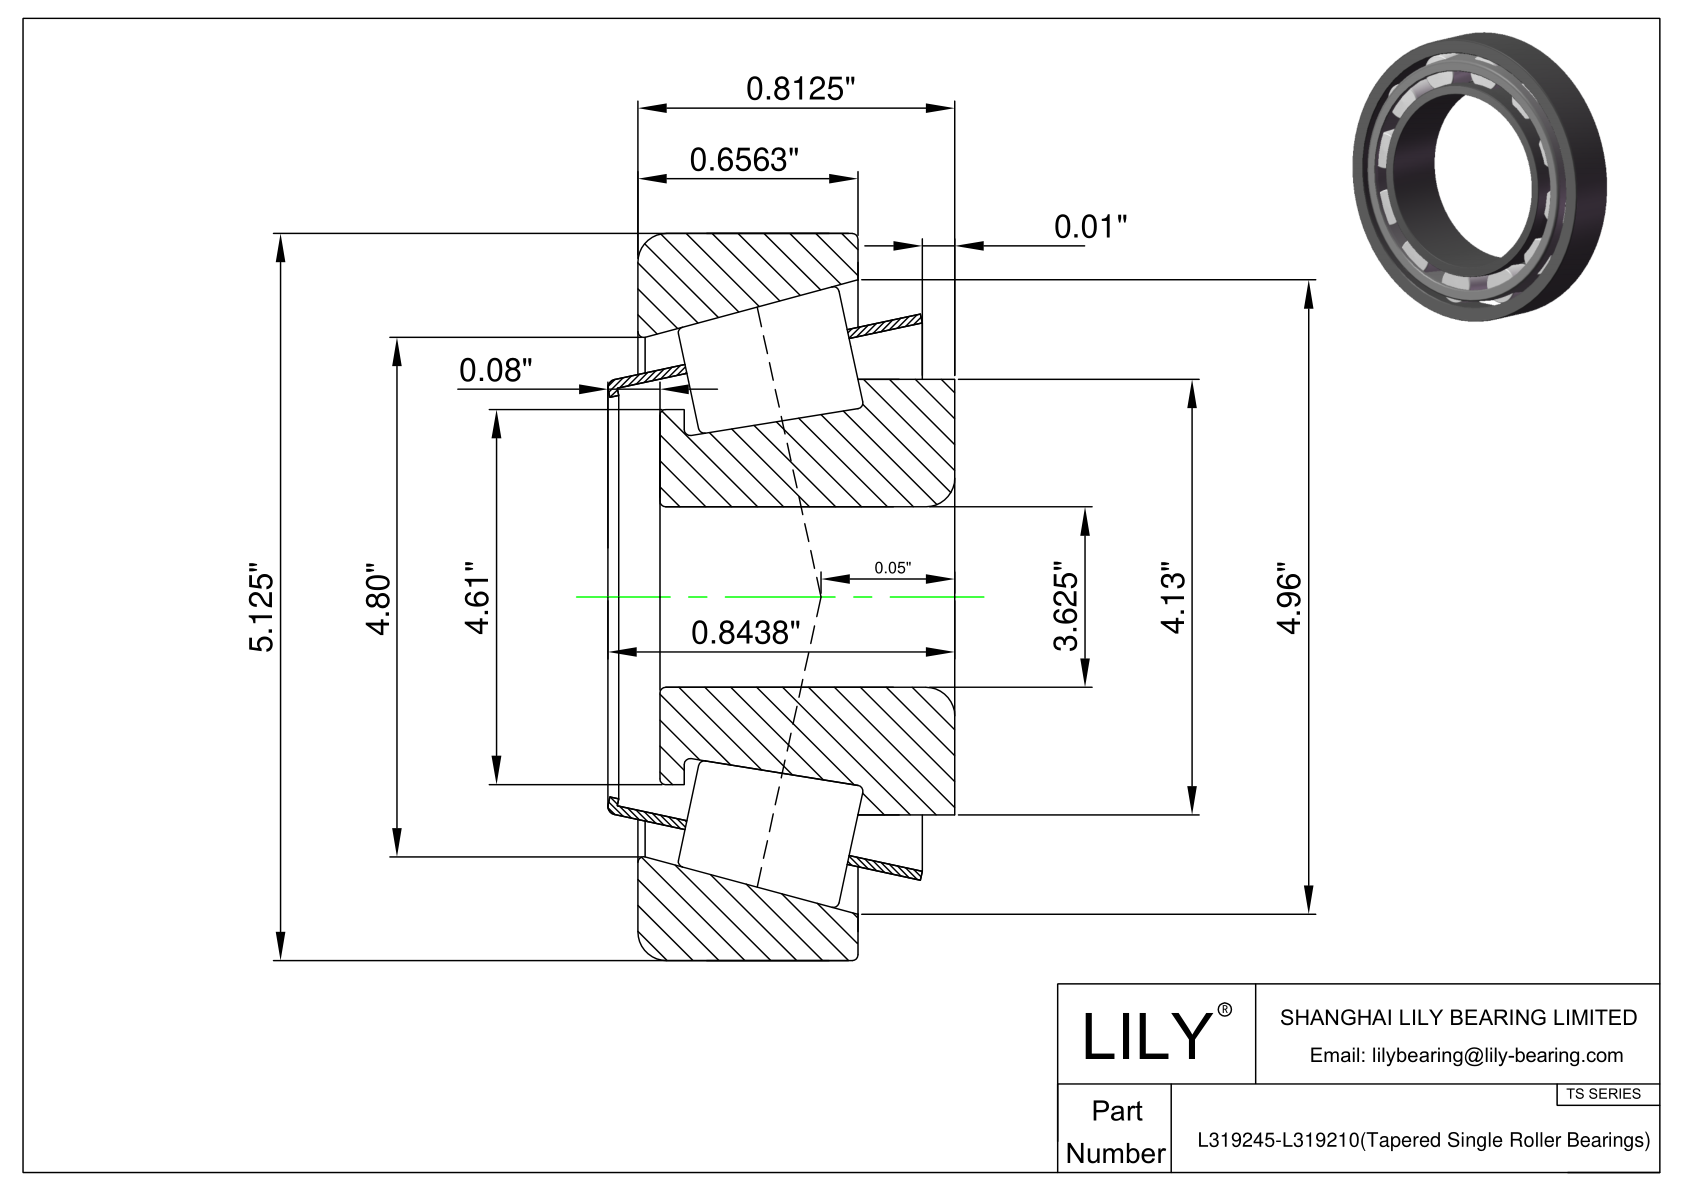 L319245-L319210 TS (Tapered Single Roller Bearings) (Imperial) cad drawing